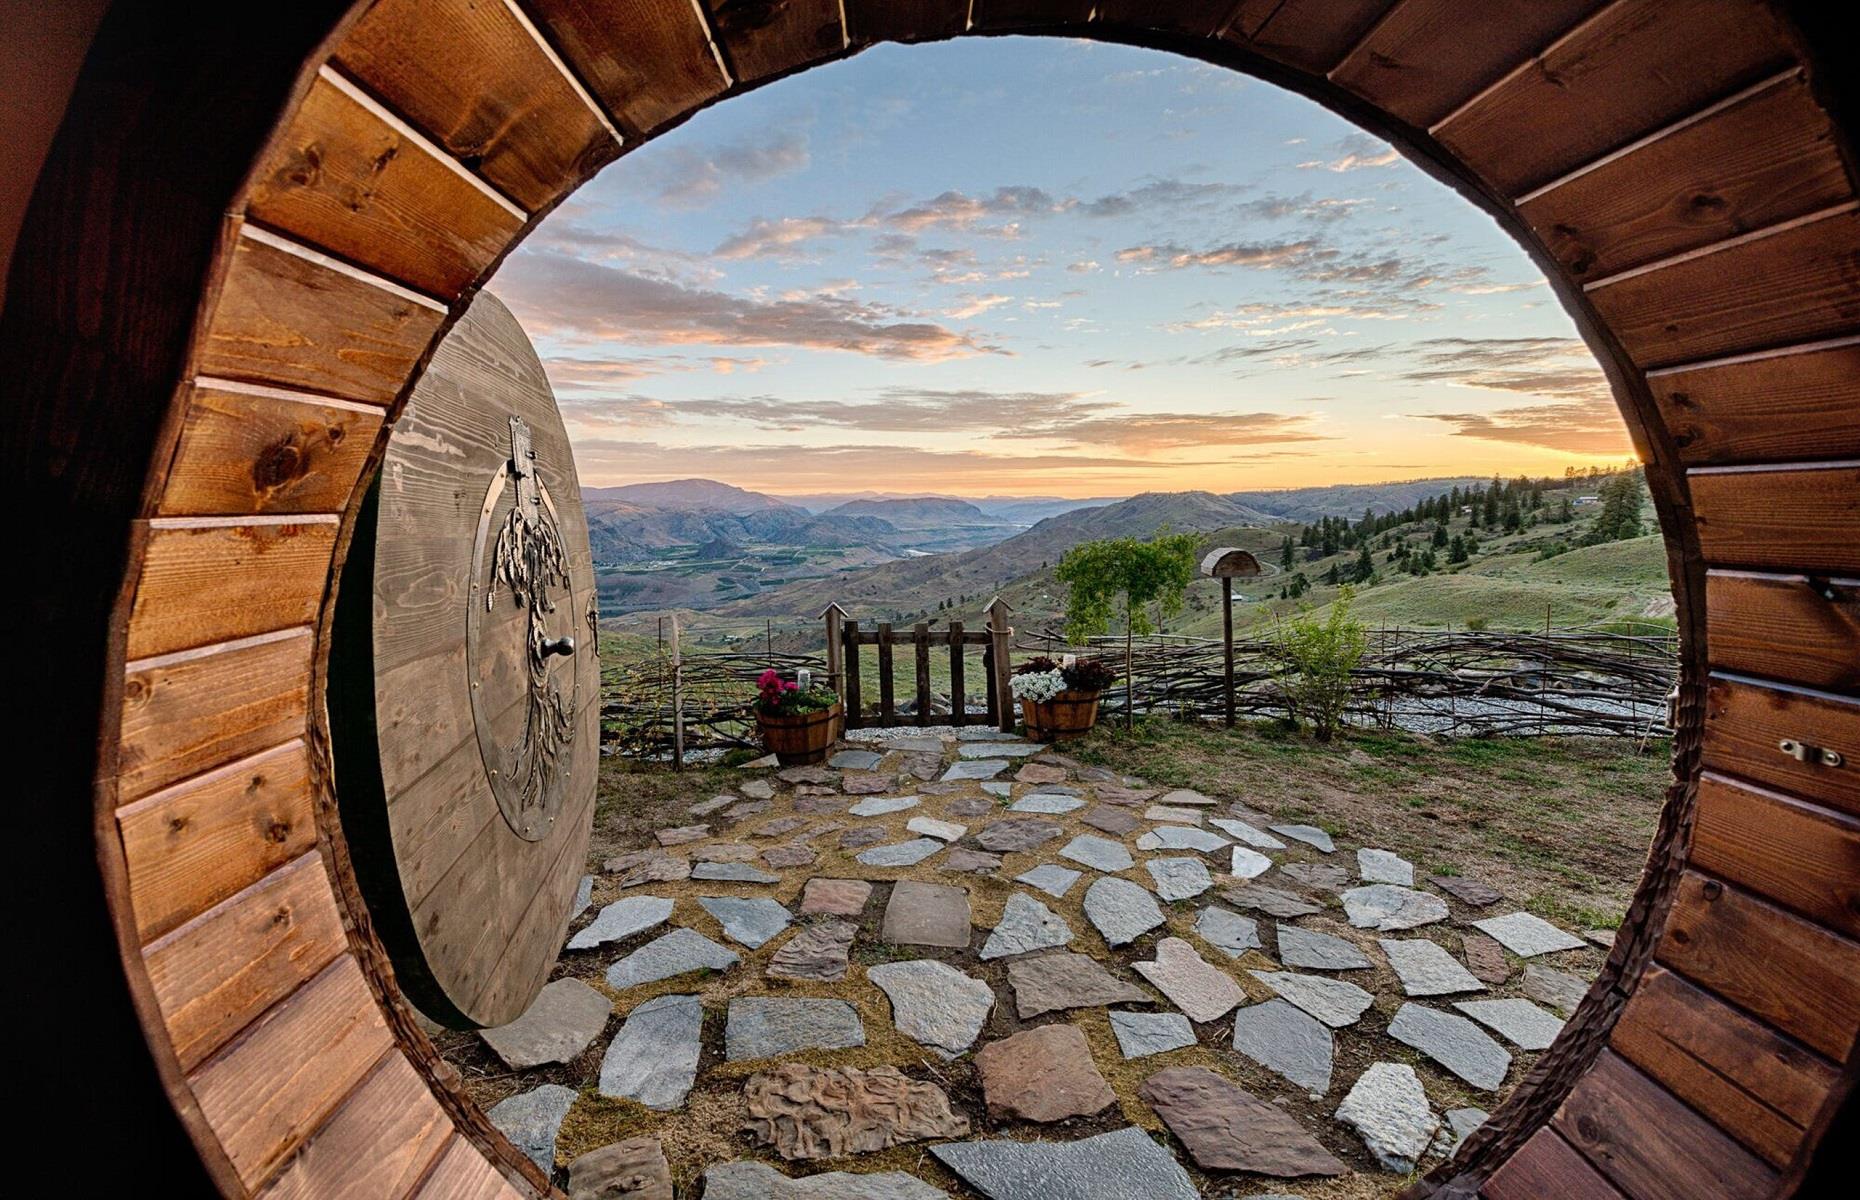 Real-life hobbit homes that put The Shire to shame